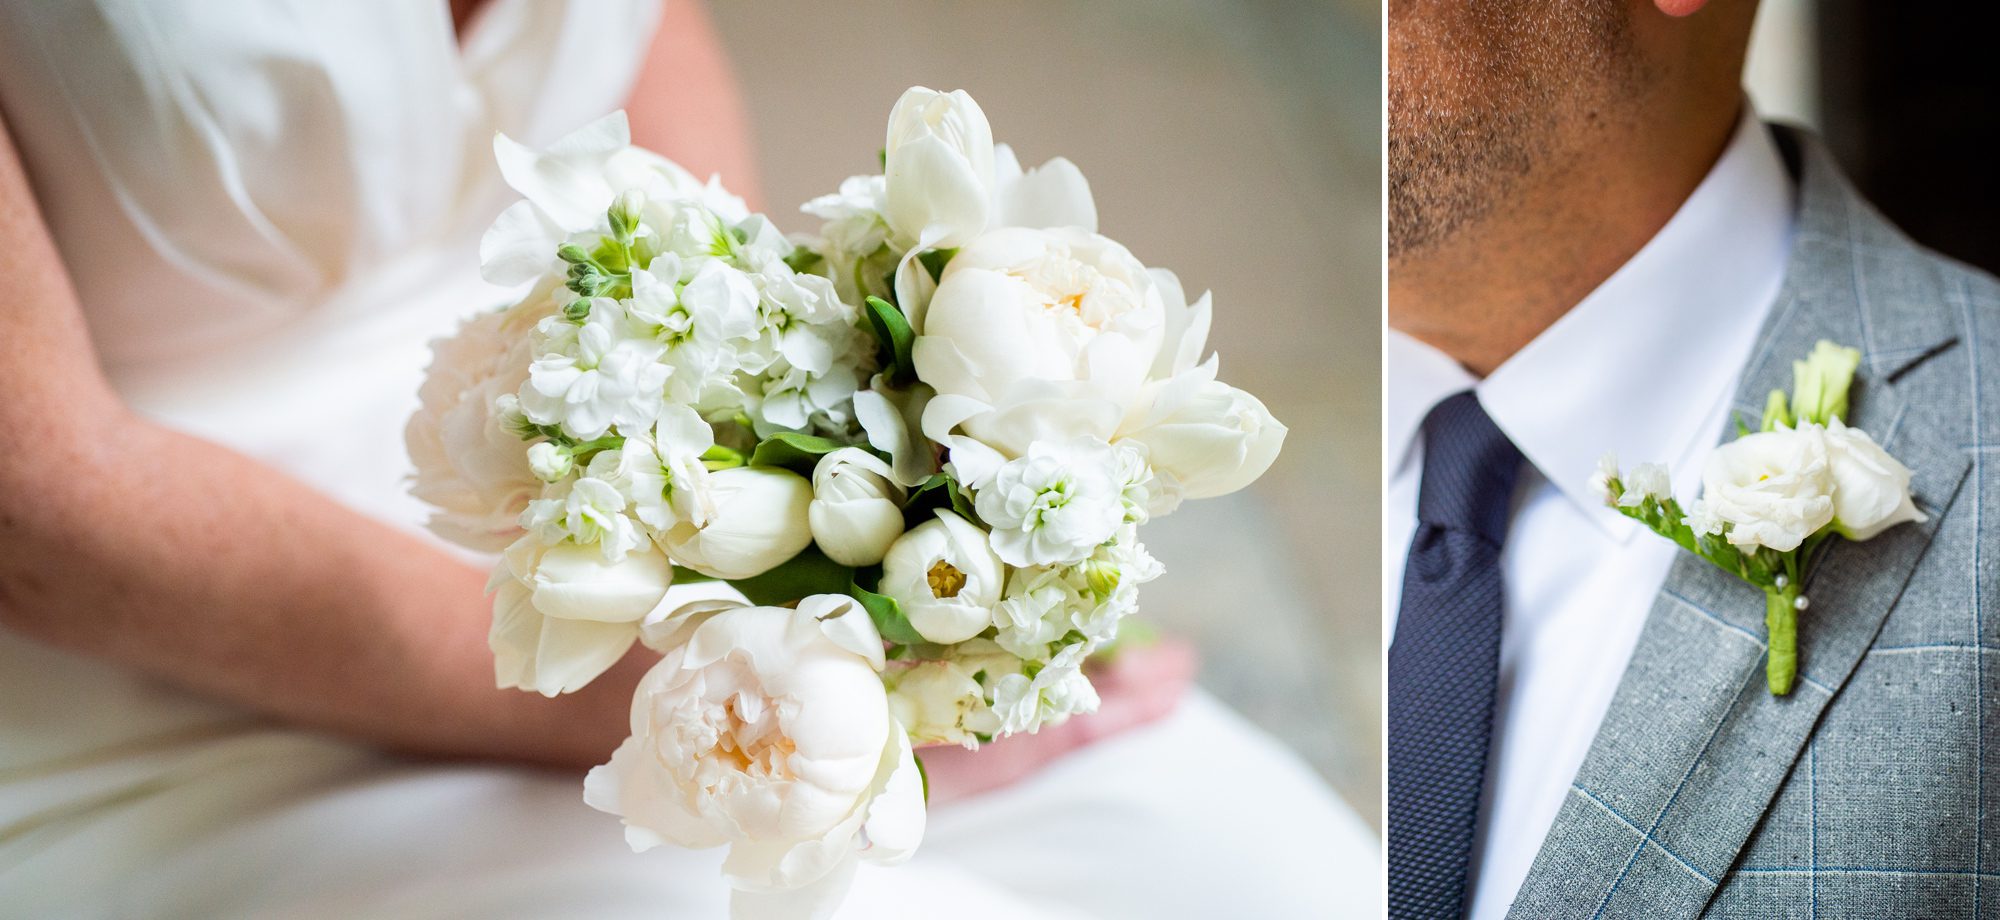 Wedding Flowers for NY Elopement